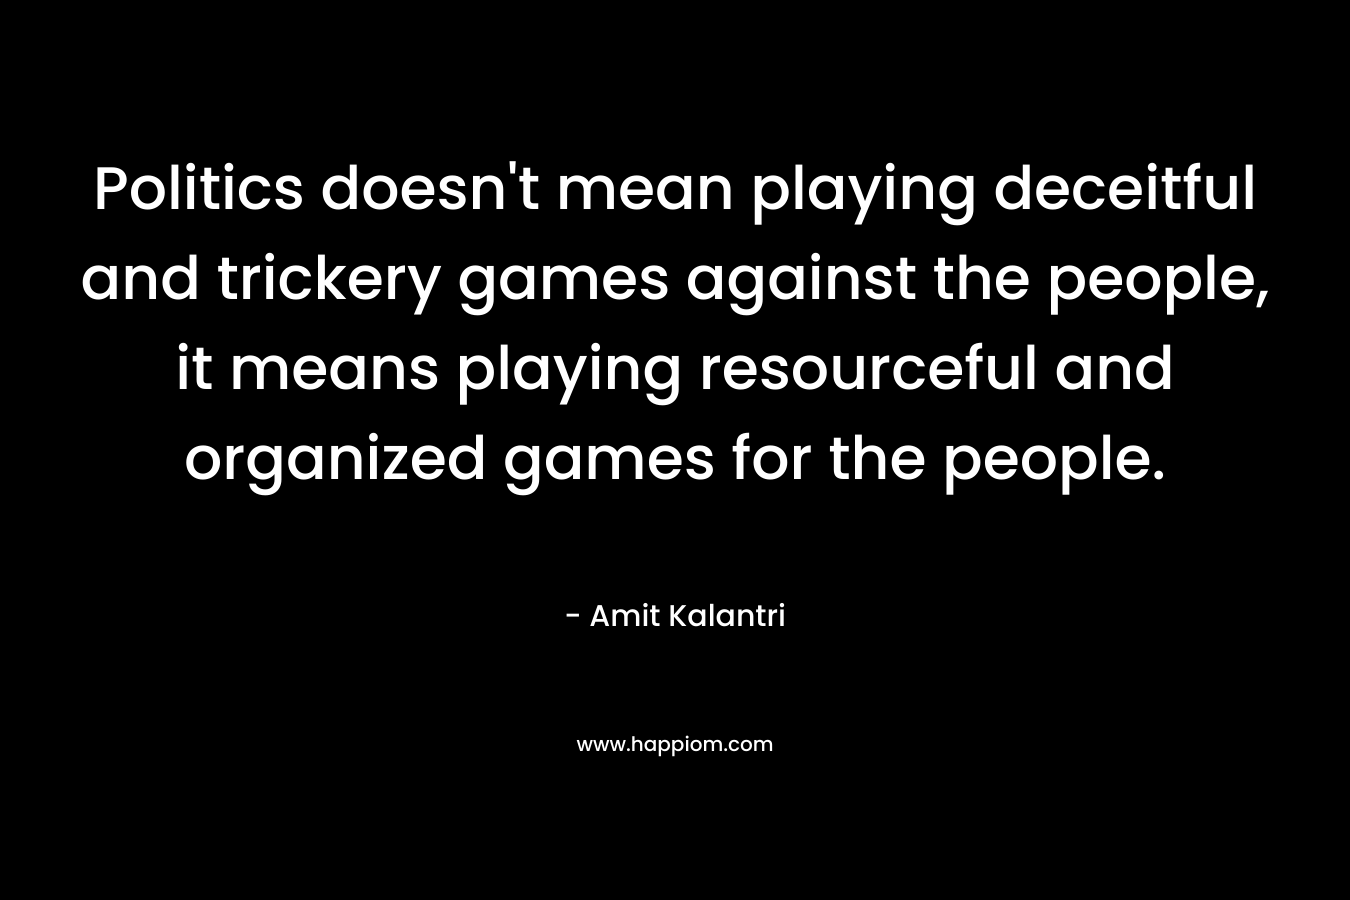 Politics doesn't mean playing deceitful and trickery games against the people, it means playing resourceful and organized games for the people.